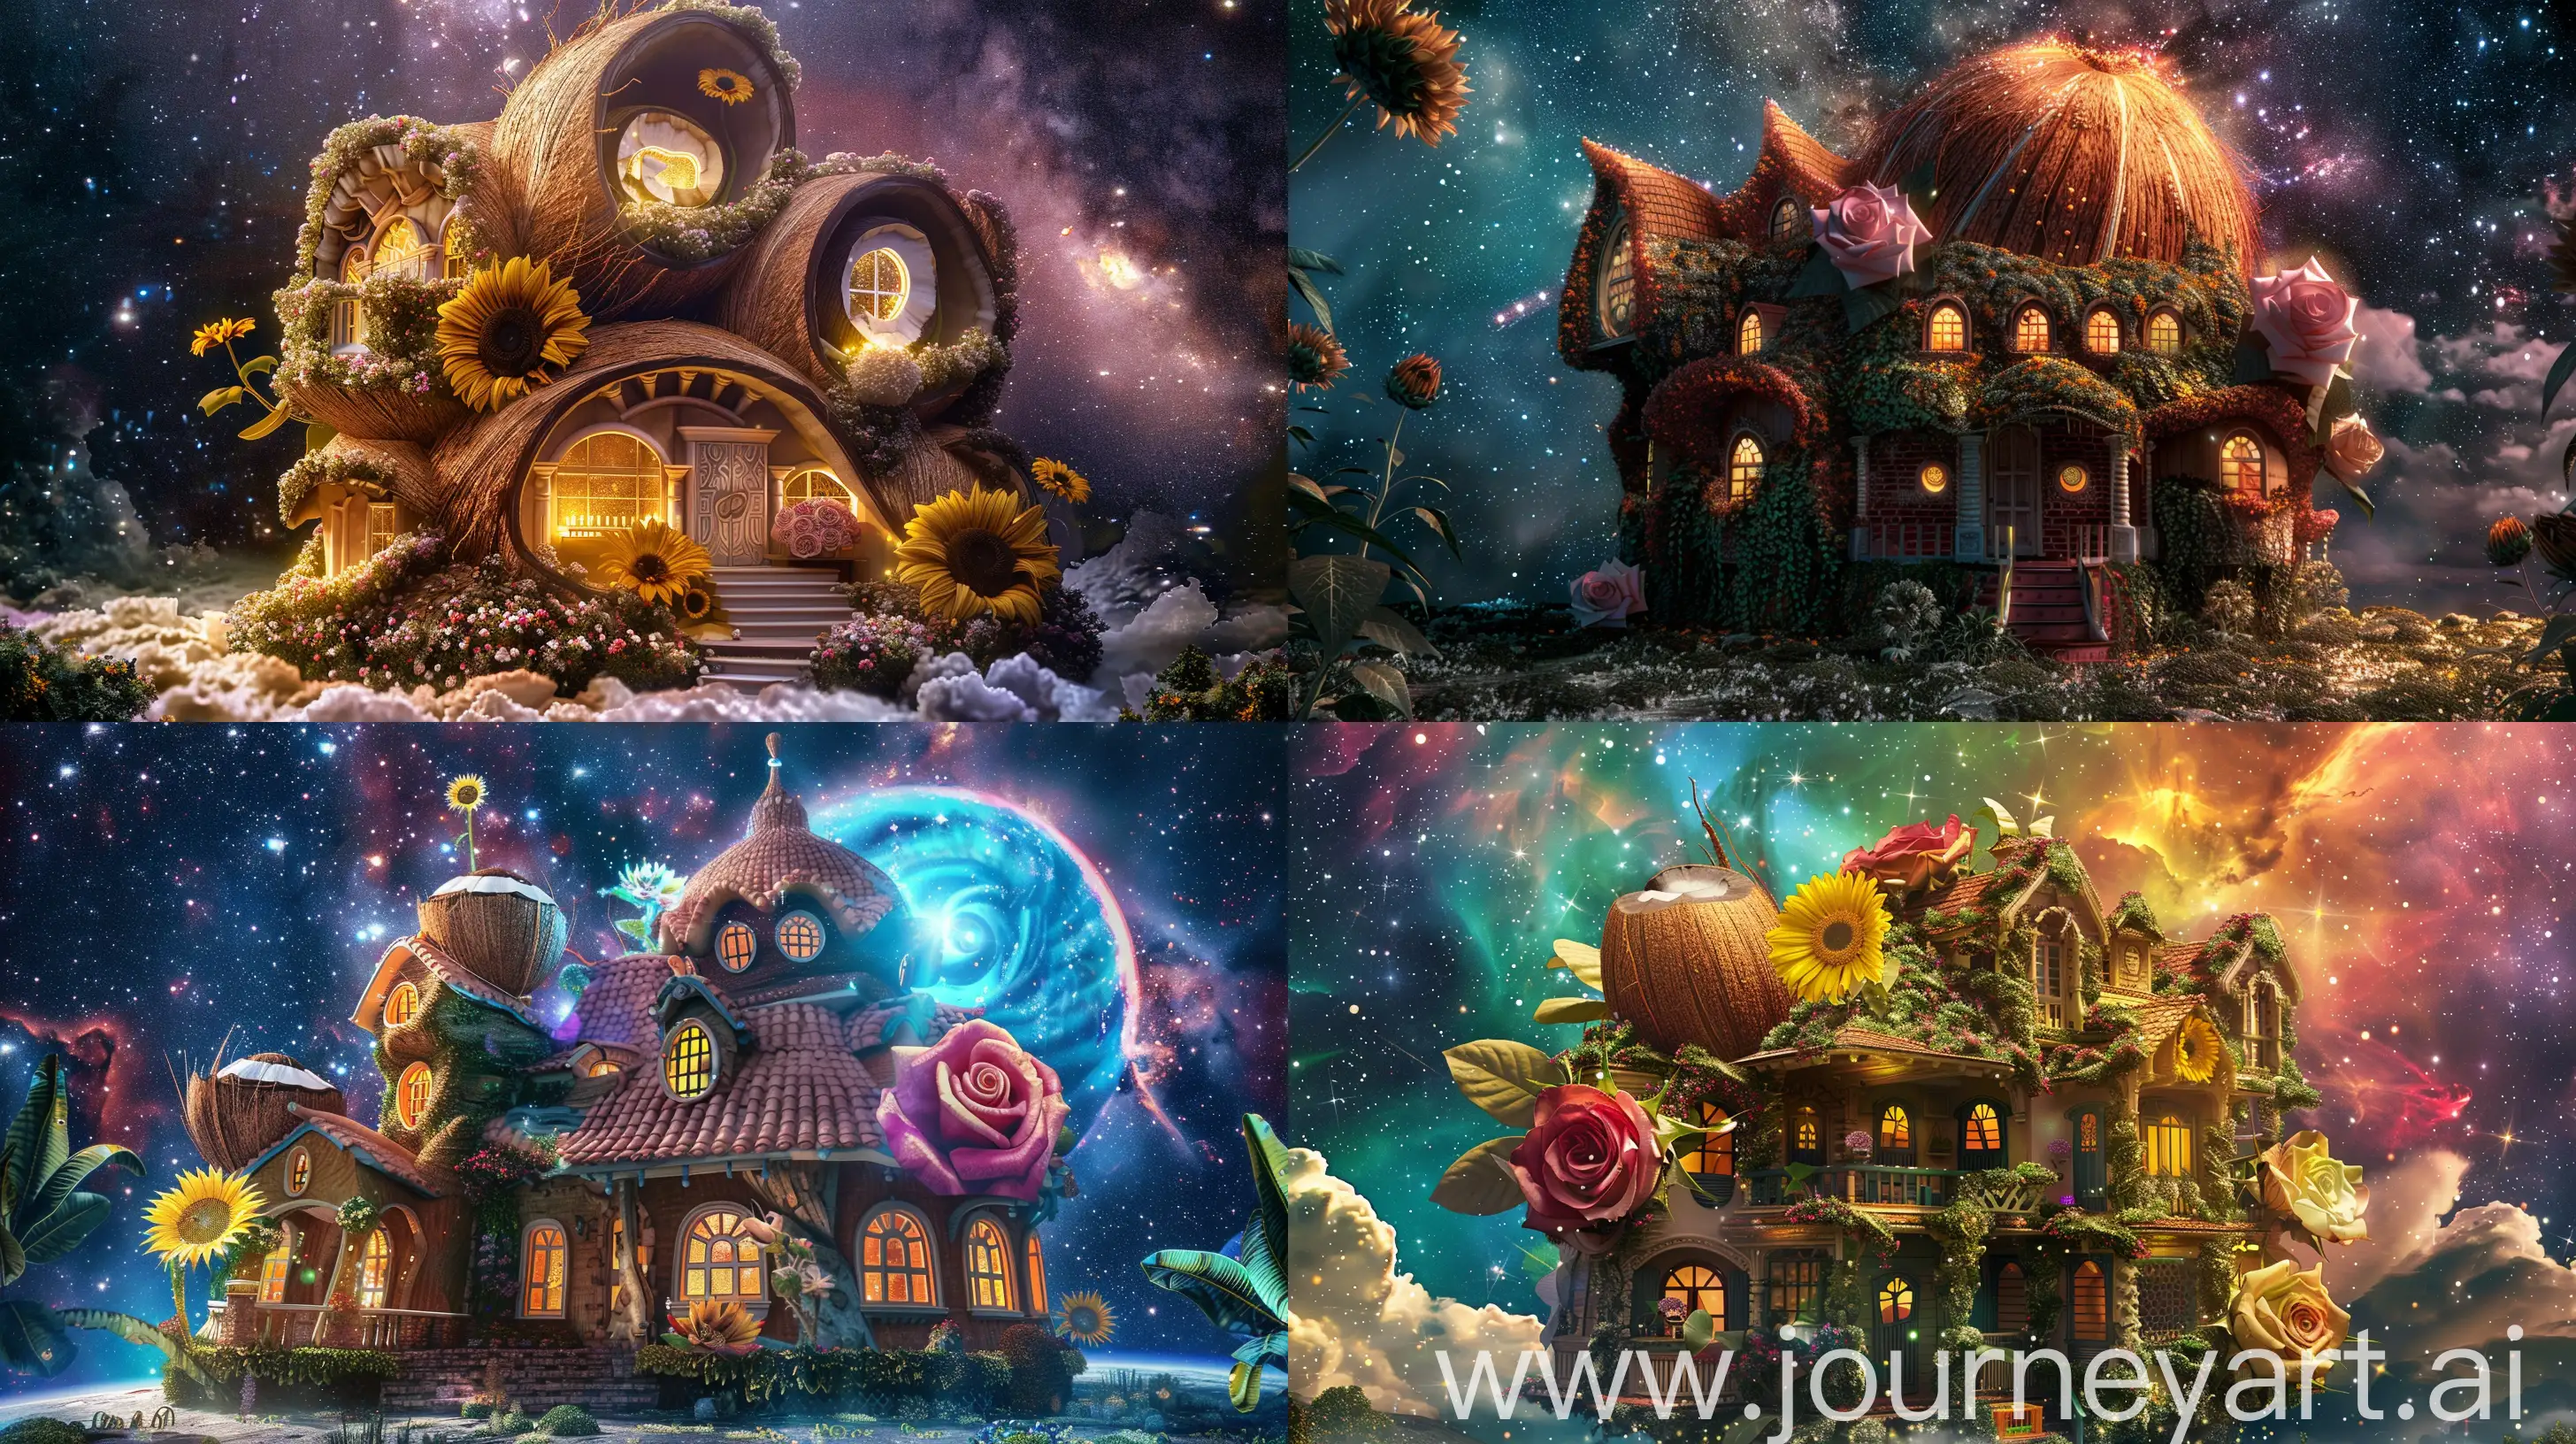 Fantasy-Coconut-Rose-and-Sunflower-House-in-Galaxy-Landscape